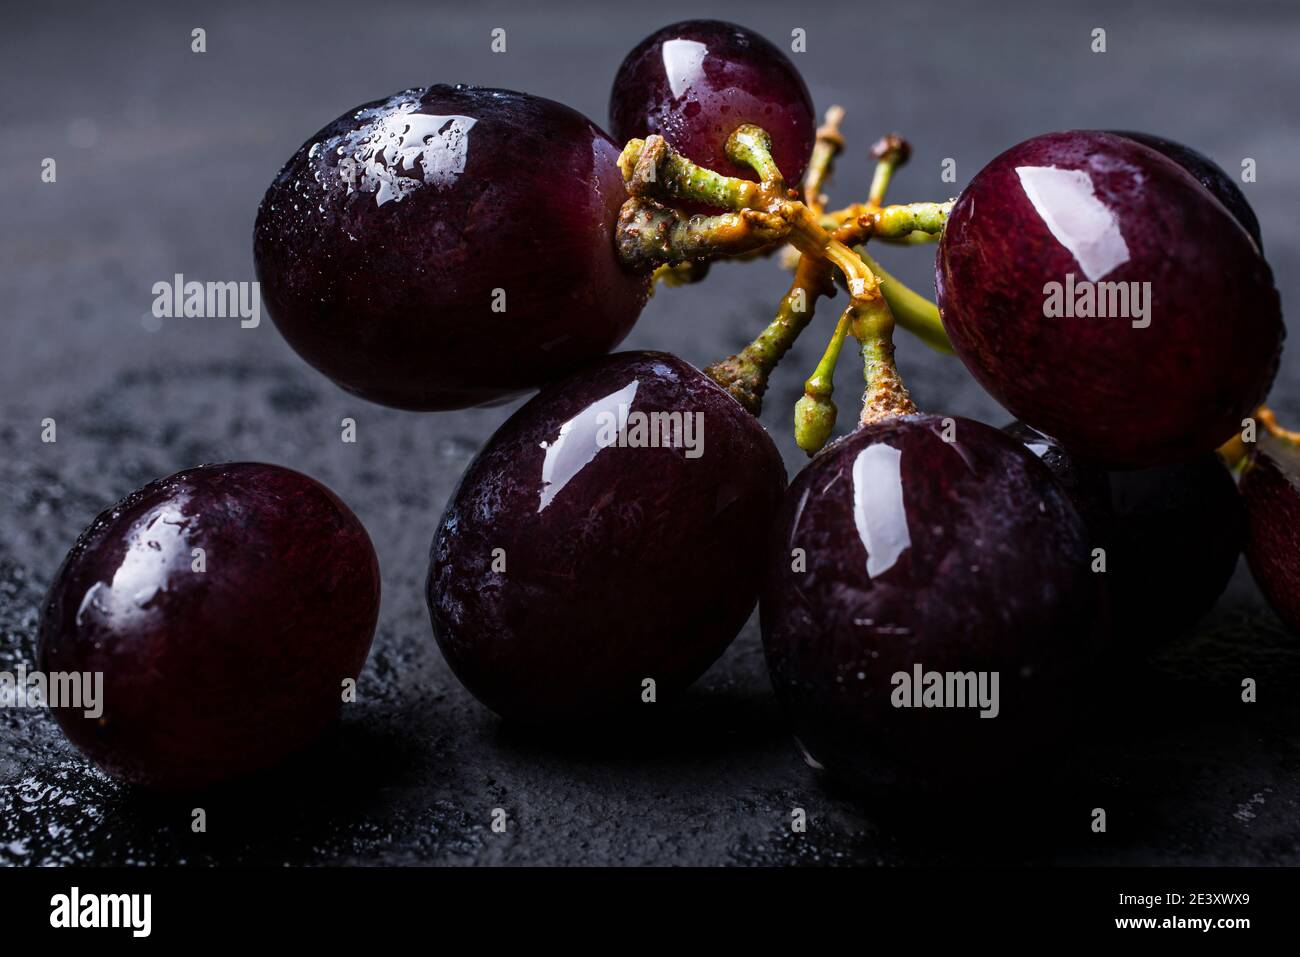 in the foreground a bunch of black table grapes Stock Photo